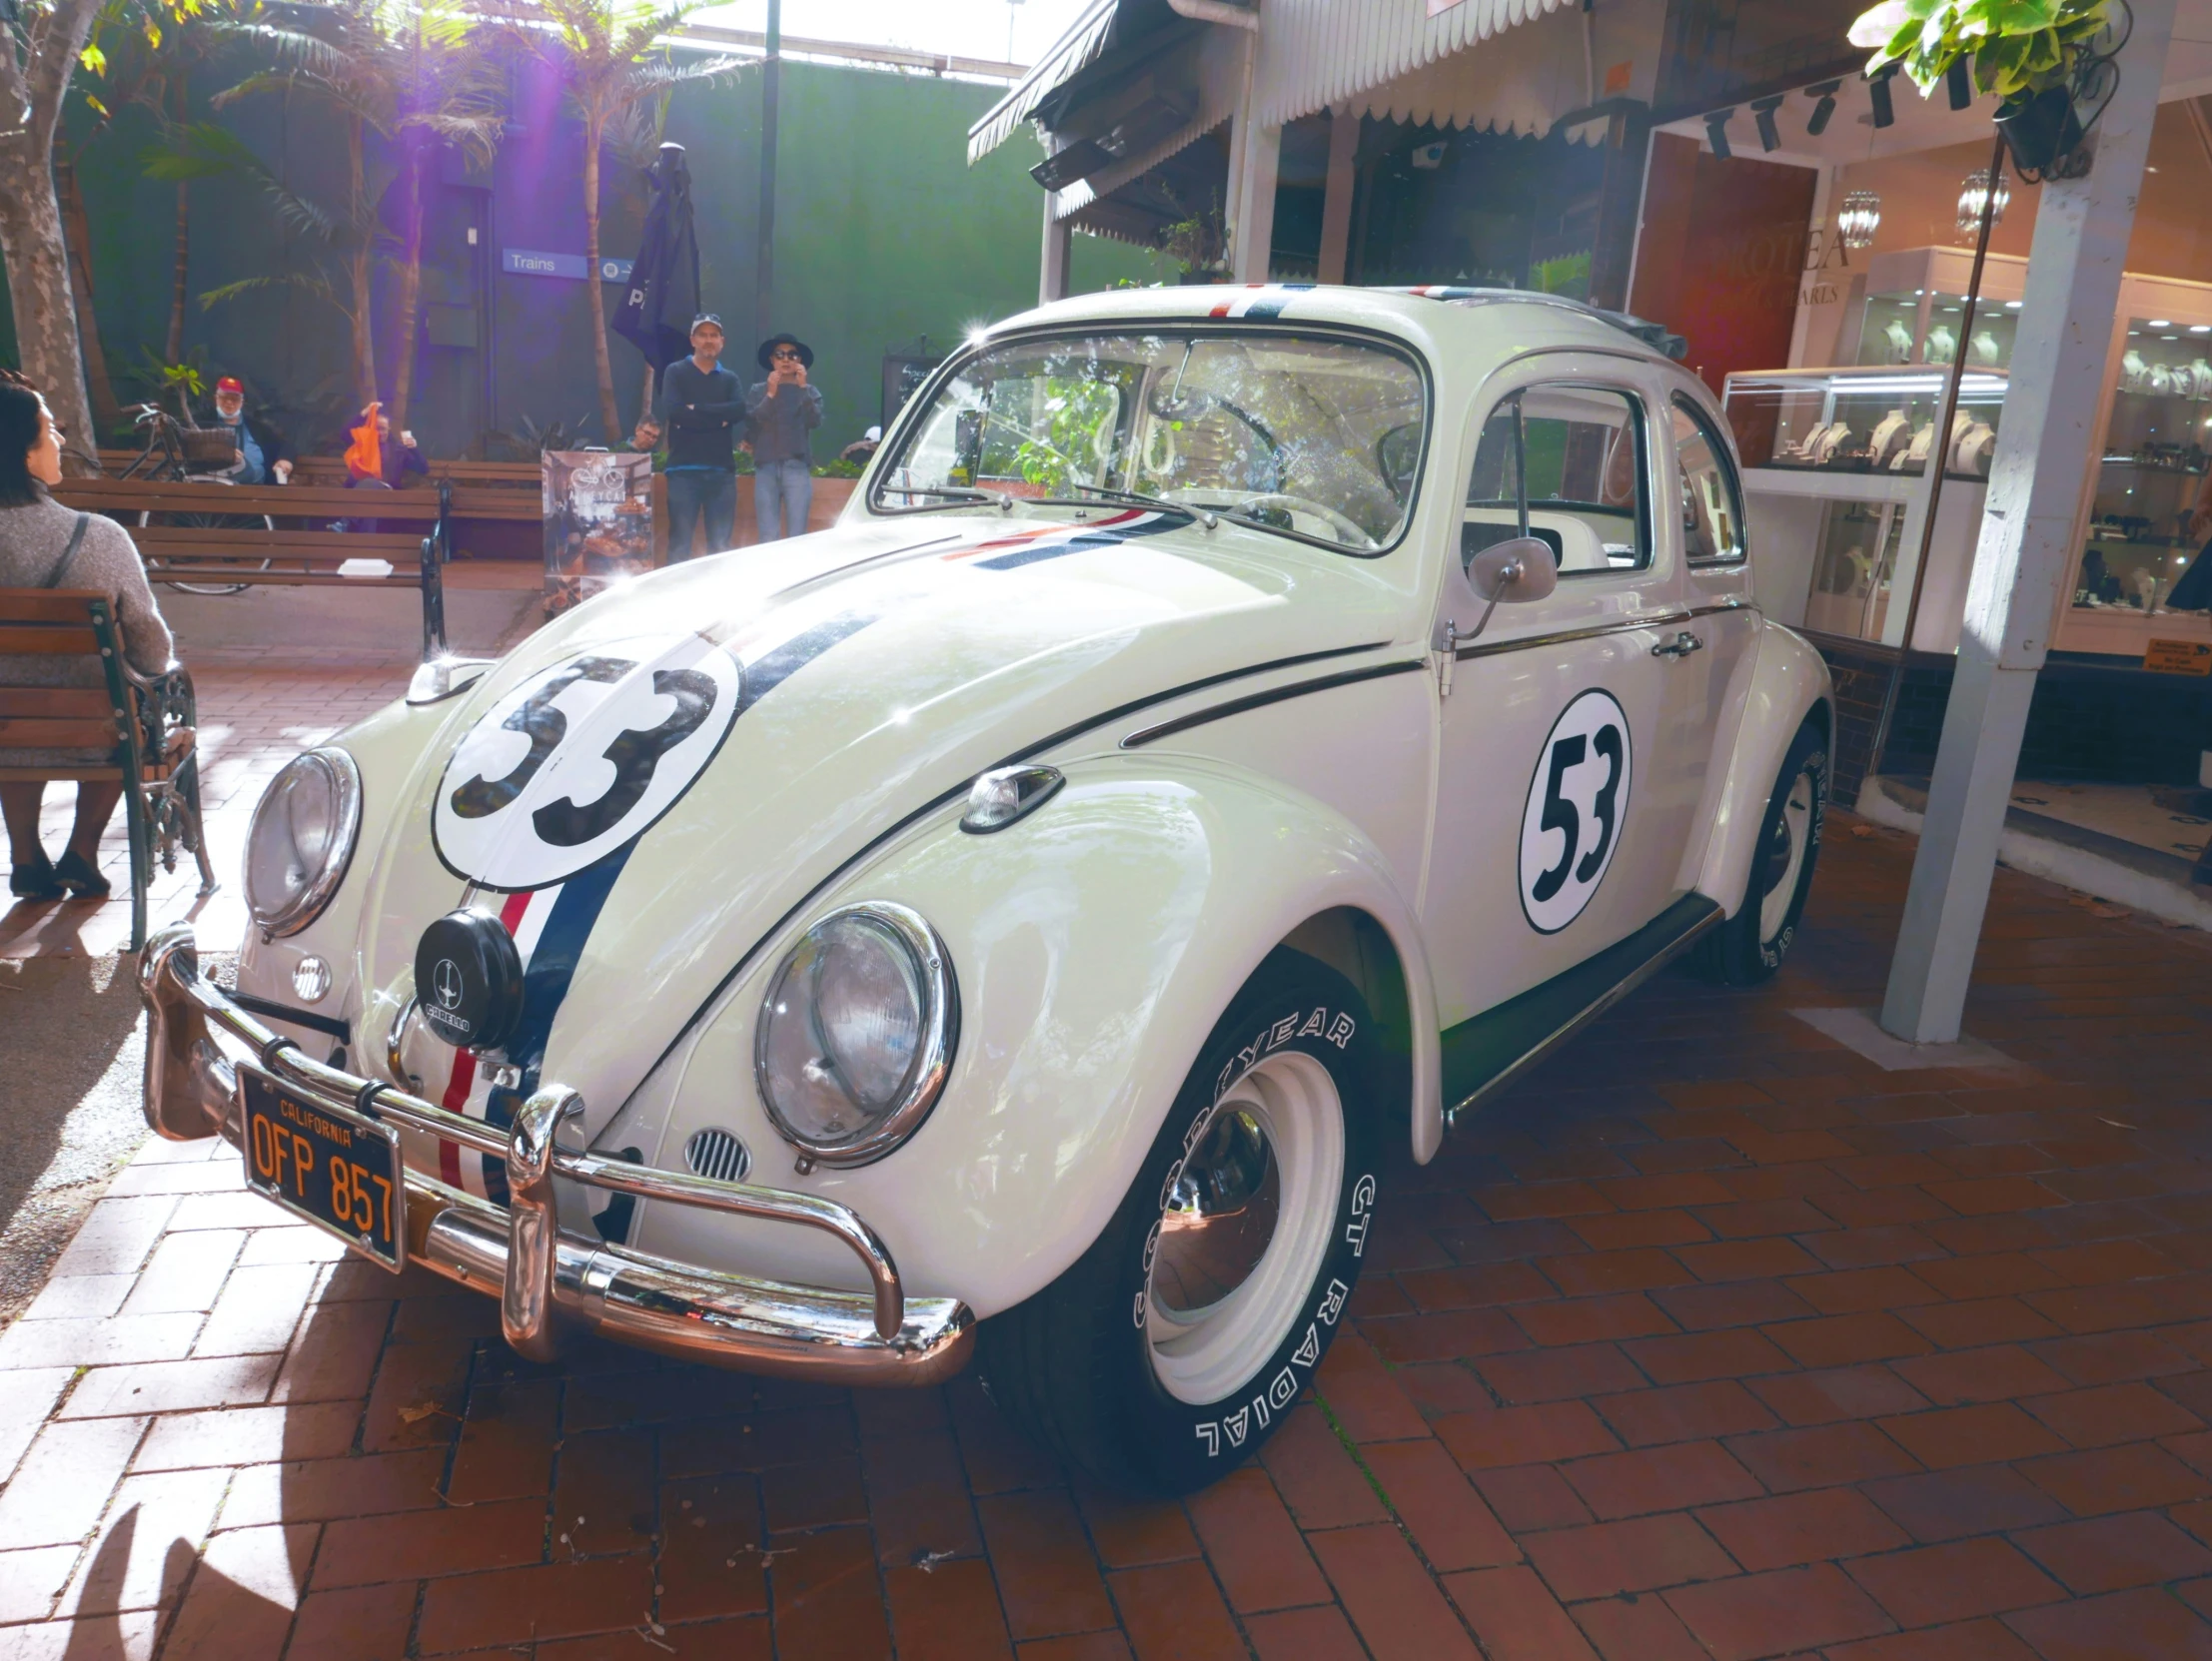 an old style beetle on display at a car show